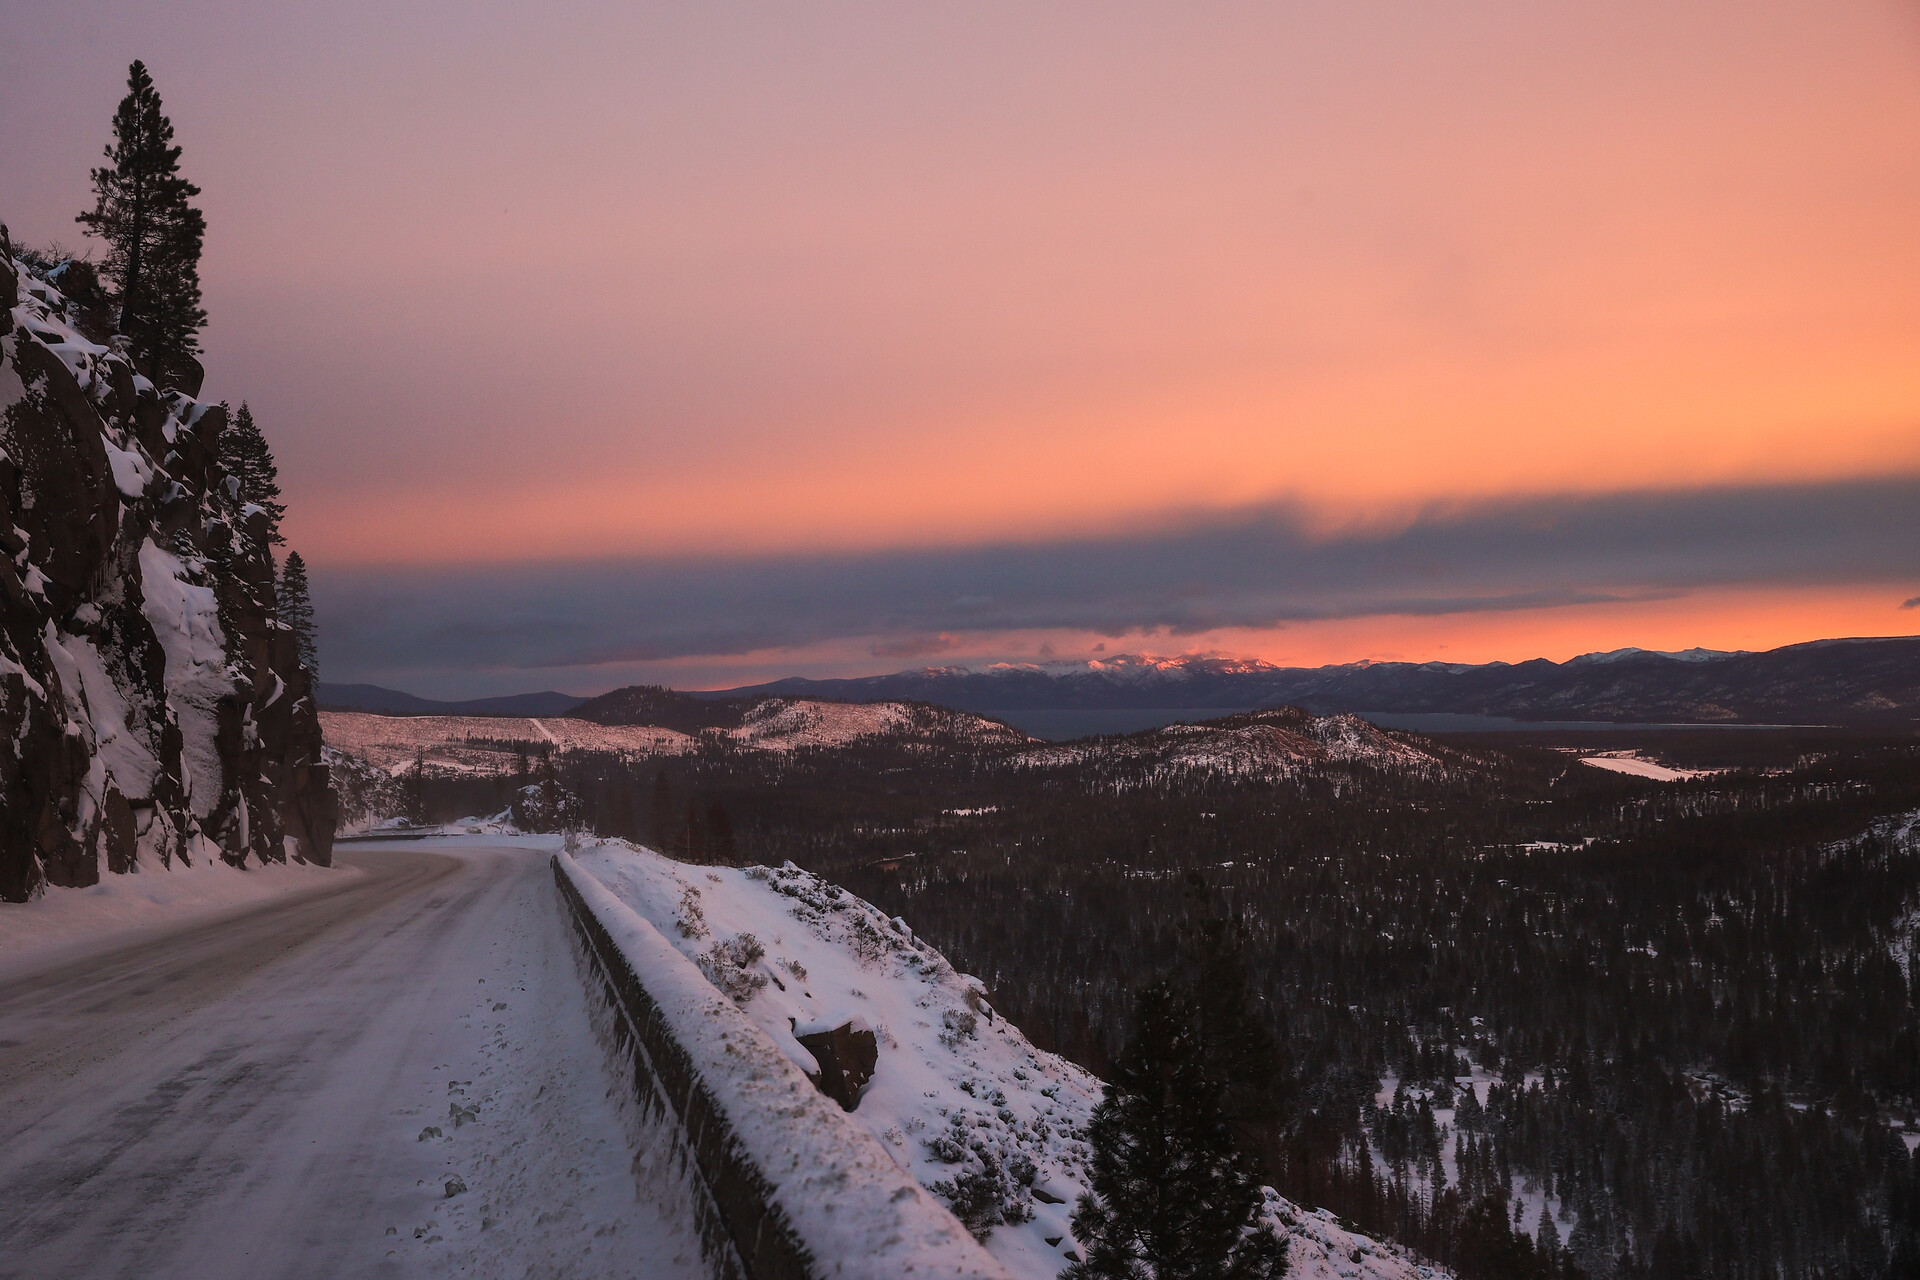 A peachy pink sky, with a low, blue line of clouds, taken from the side of a snowy road overlooking a valley full of conifers and snow.